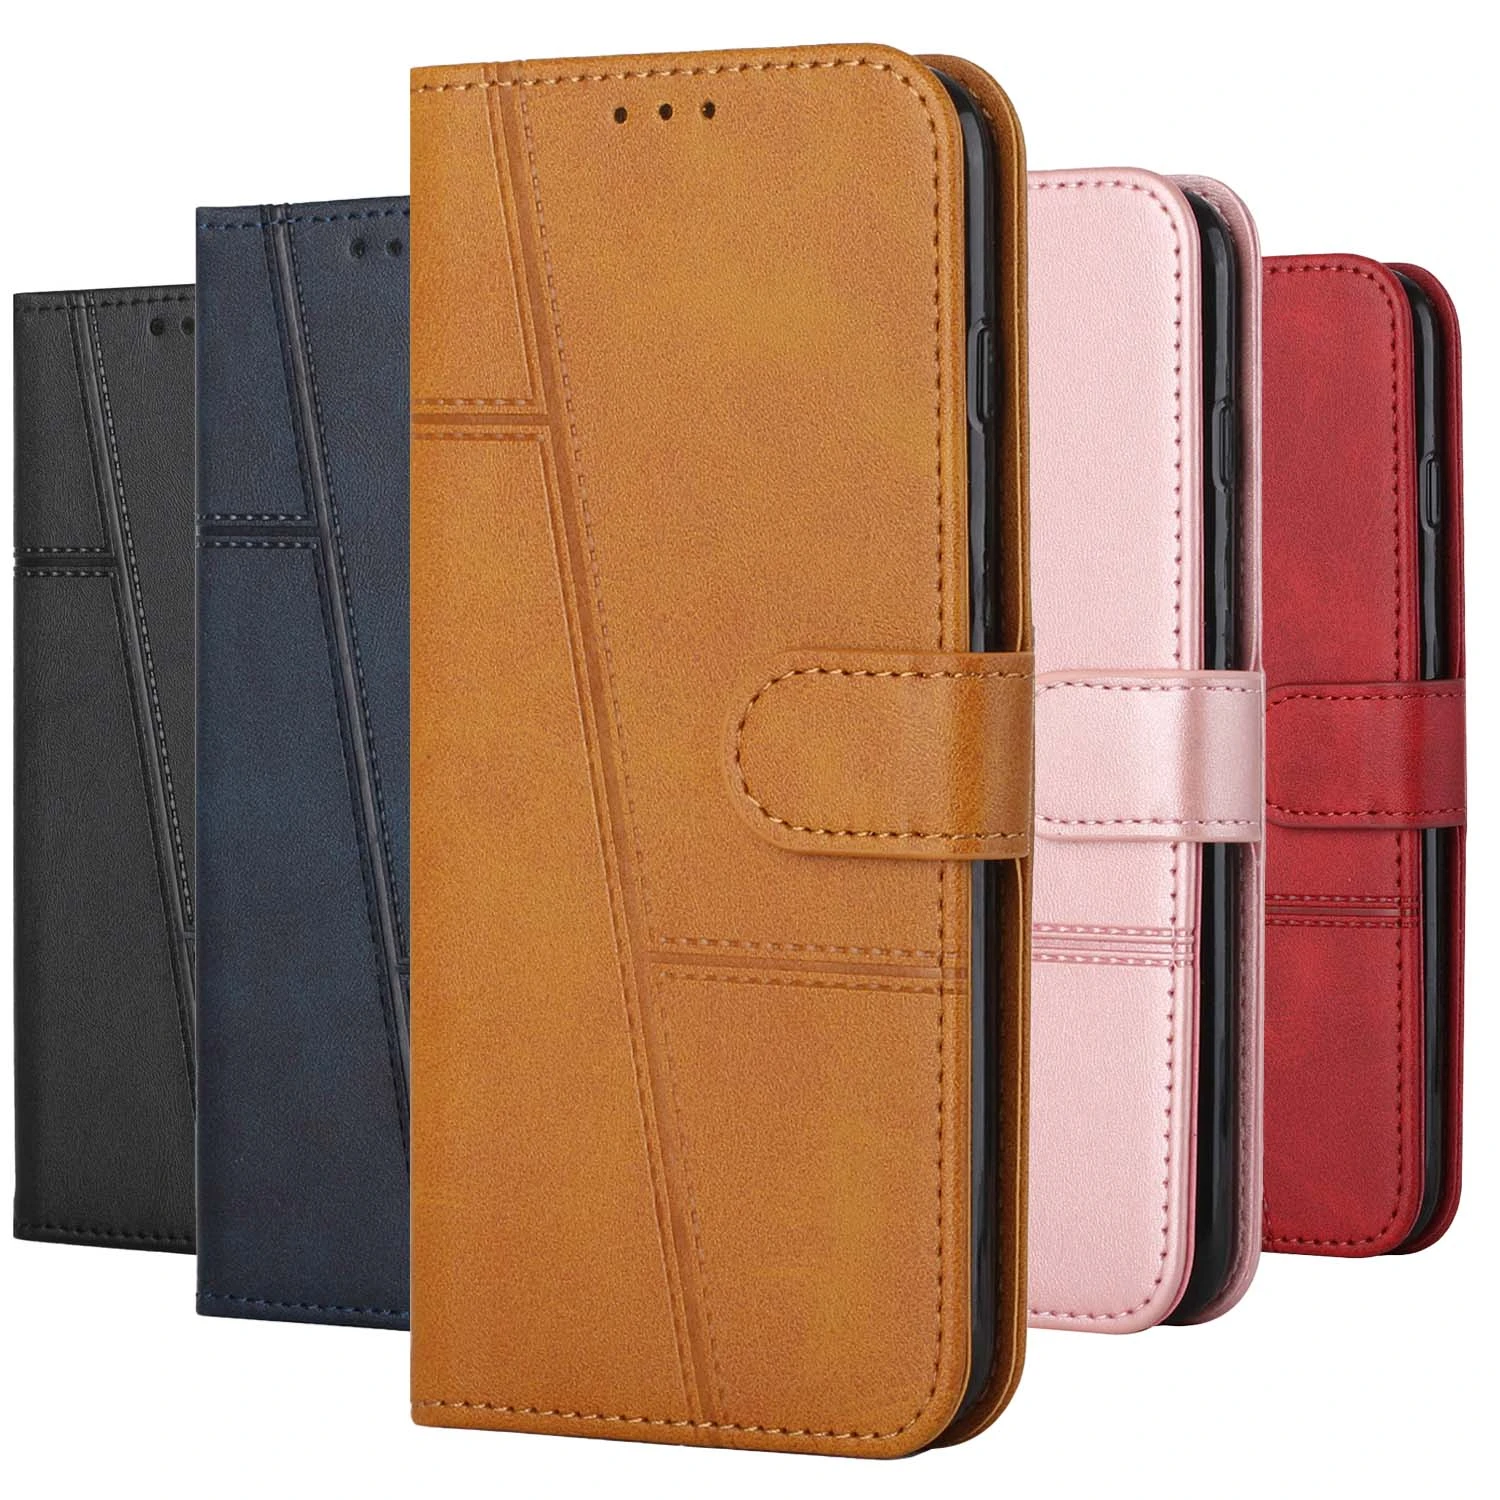 Galaxy S22+ silicone case Leather Wallet Case For Samsung Galaxy Note 20 Ultra S22 Plus S21 FE S20 A12 A22 A32 A52 A72 A13 A23 A53 Card Holder Stand Cover galaxy s22+ leather case